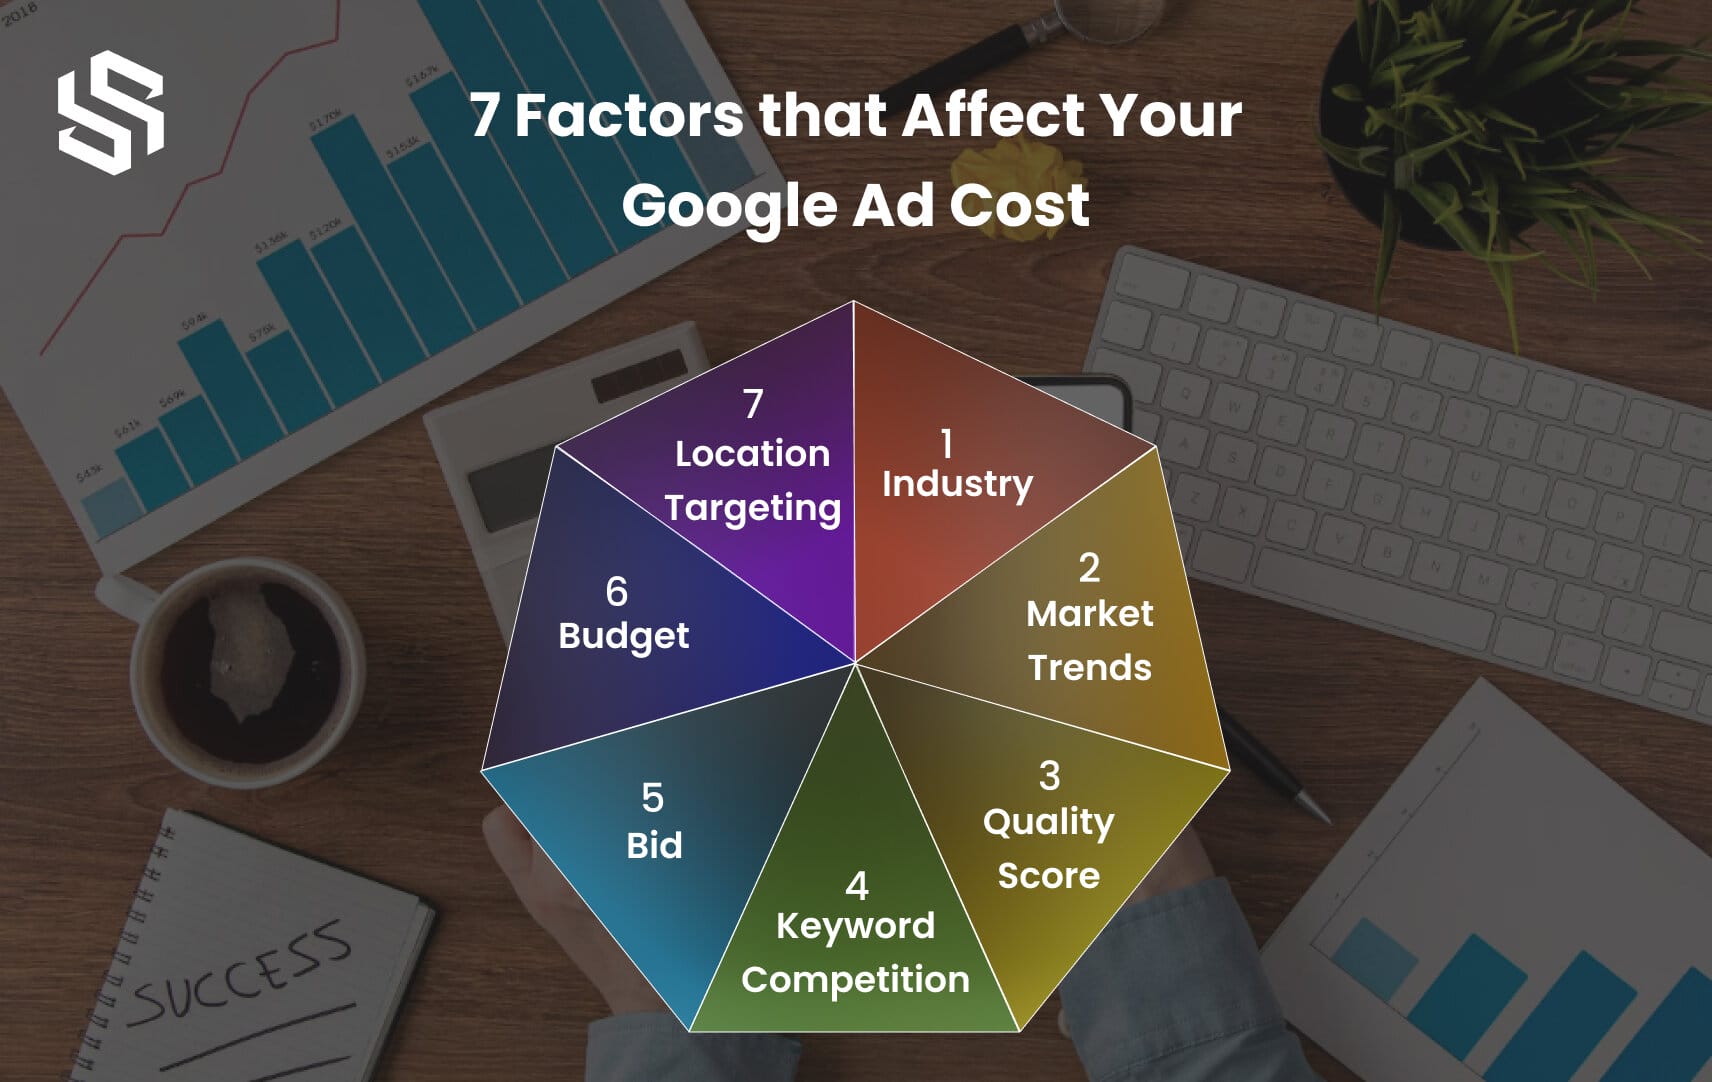 7 Factors that Affect Your Google Ad Cost